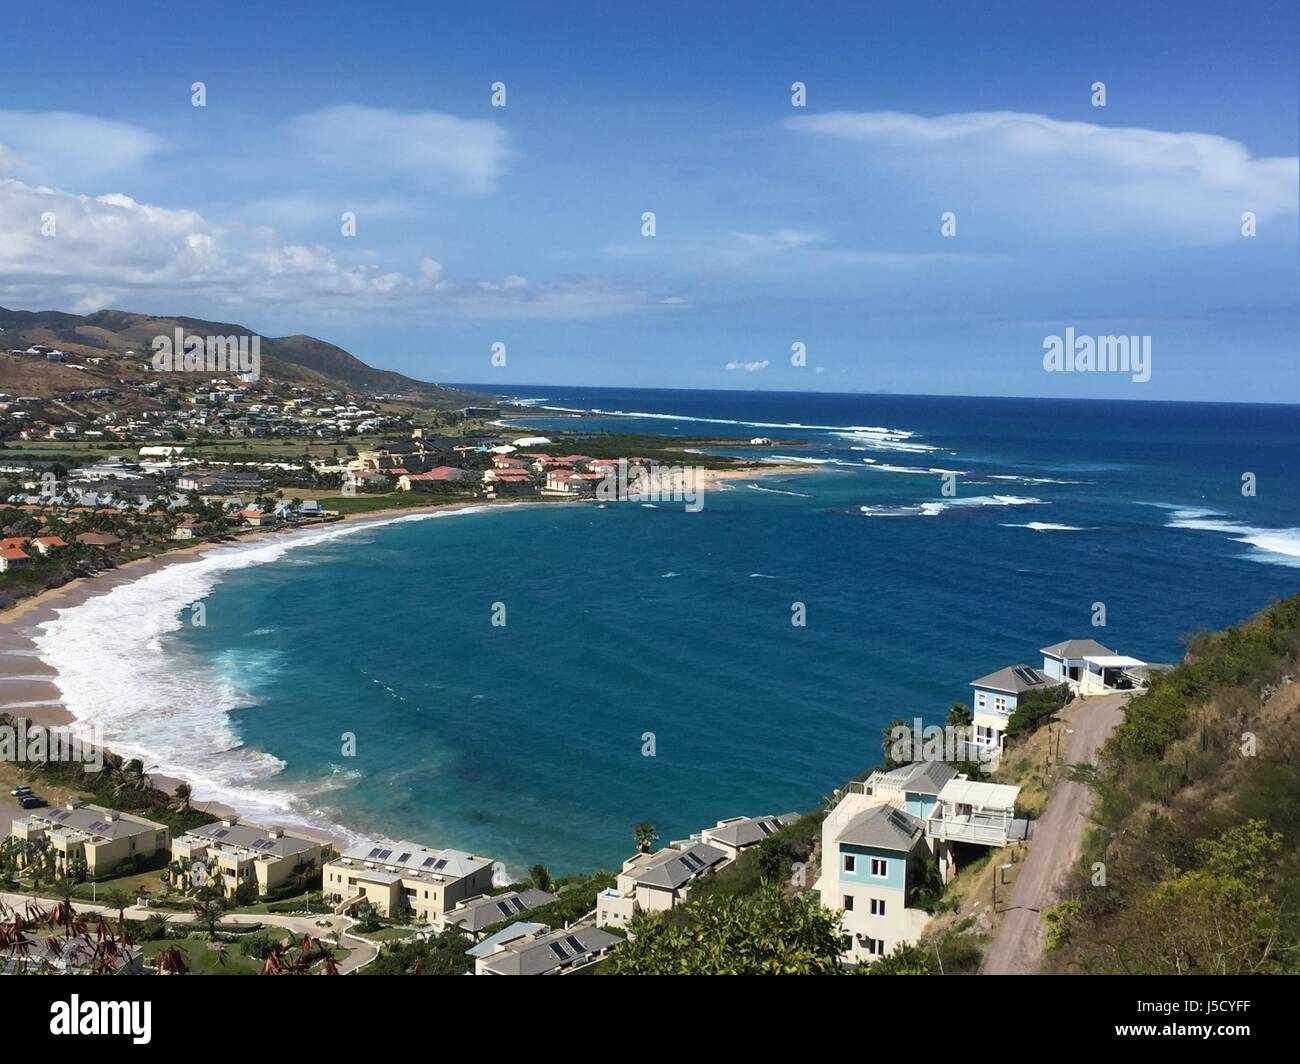 View of Frigate Bay, one of the two bays in the southeast of Basseterre. Stock Photo